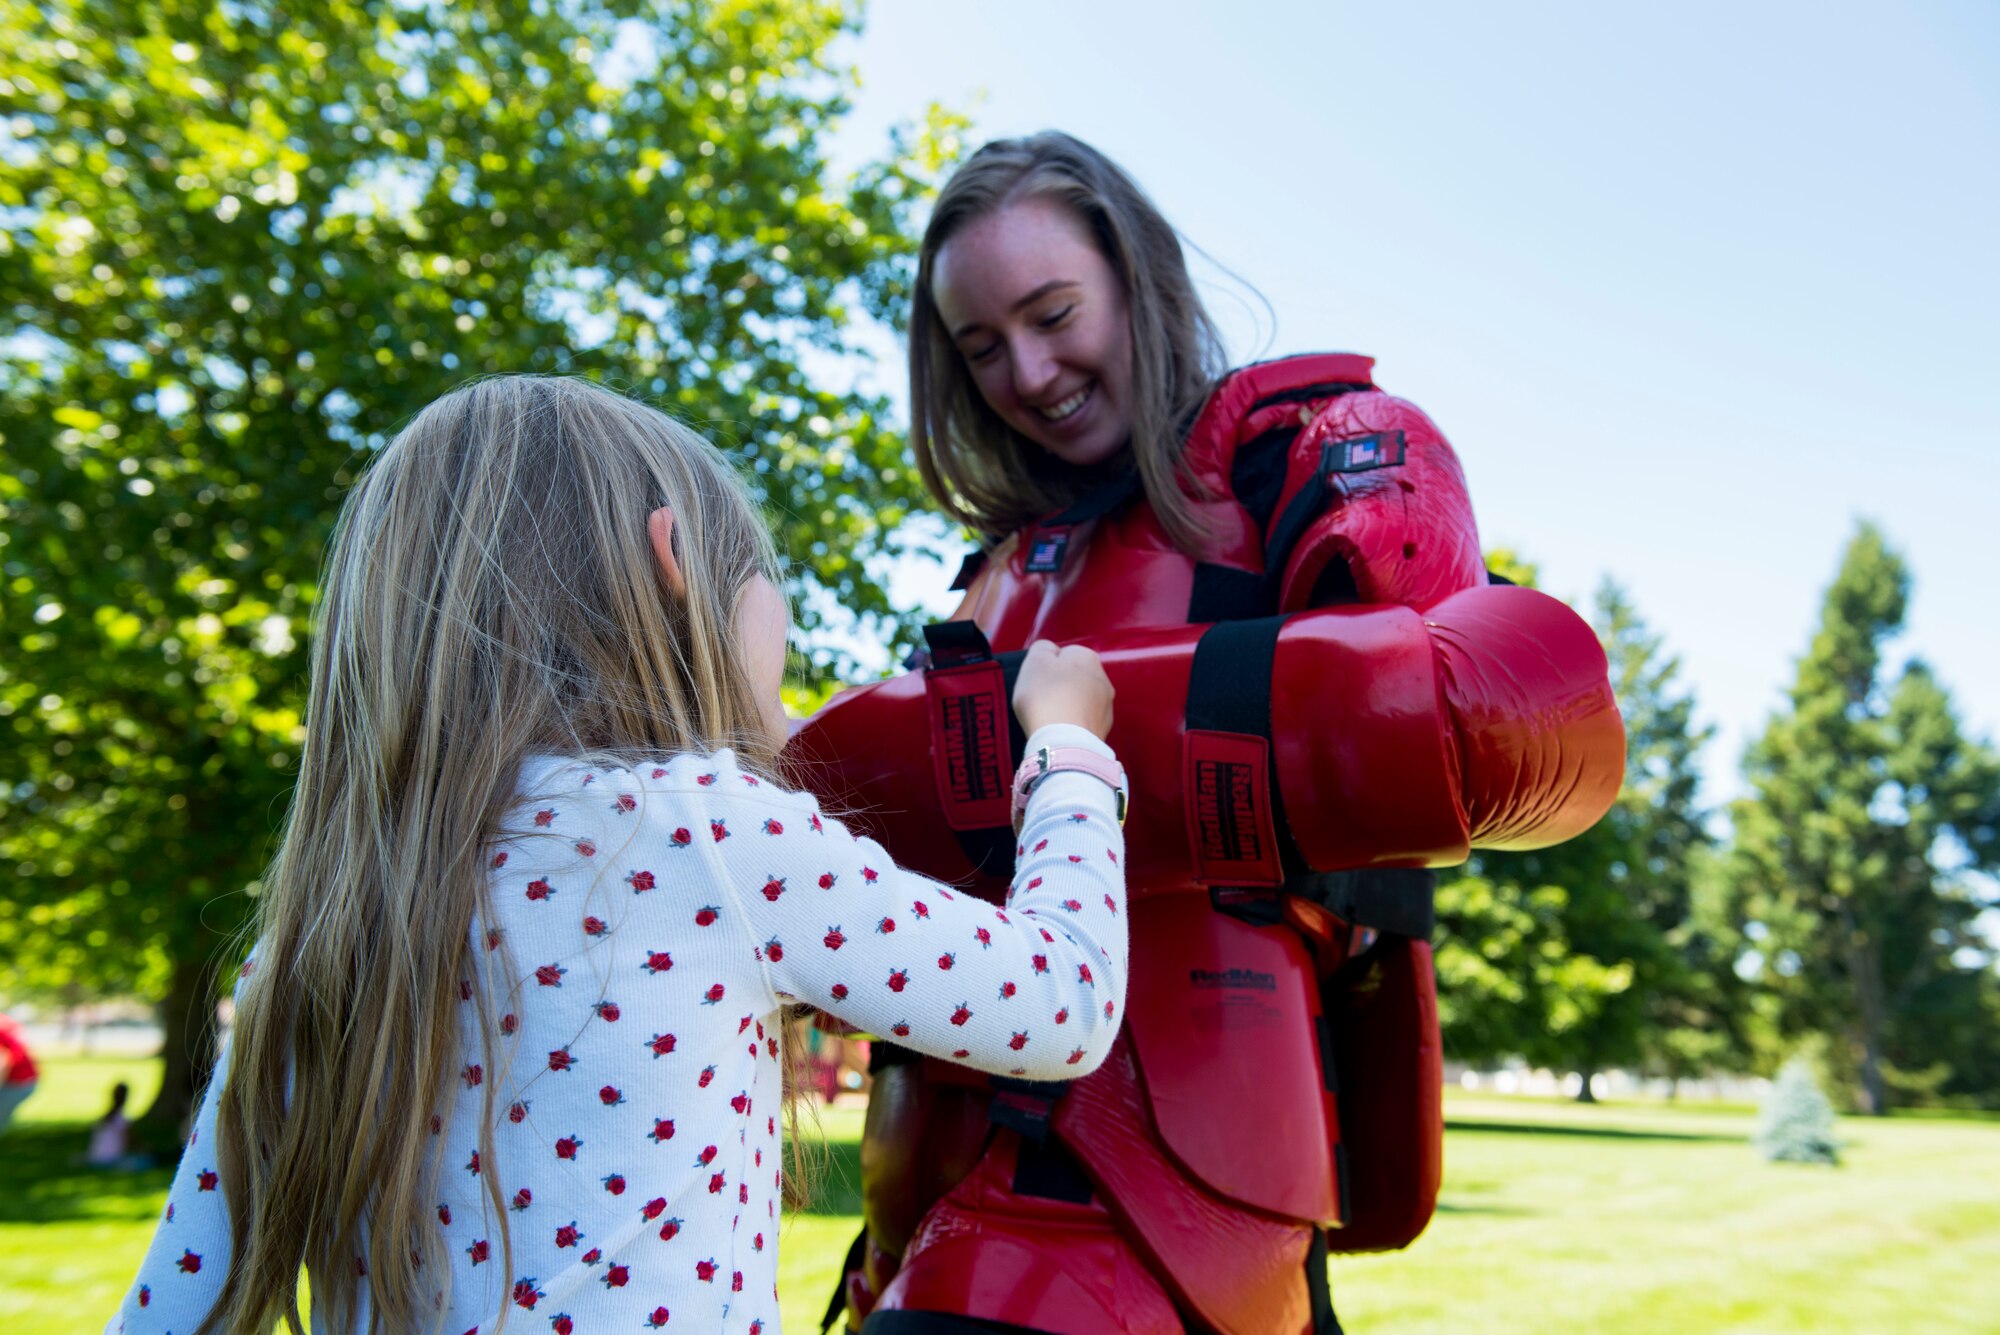 U.S. Air Force Senior Airman Samantha Rucker, 92nd Security Forces Squadron administrator, demonstrates the effectiveness of a “Redman Suit”, a physical combat training aid, to a kid from Fairchild’s Youth Center during the Summer Youth Fair at Fairchild Air Force Base, Washington, July 25, 2019. Approximately 100 children from across Fairchild participated in the fair. (U.S. Air Force photo by Airman 1st Class Lawrence Sena)